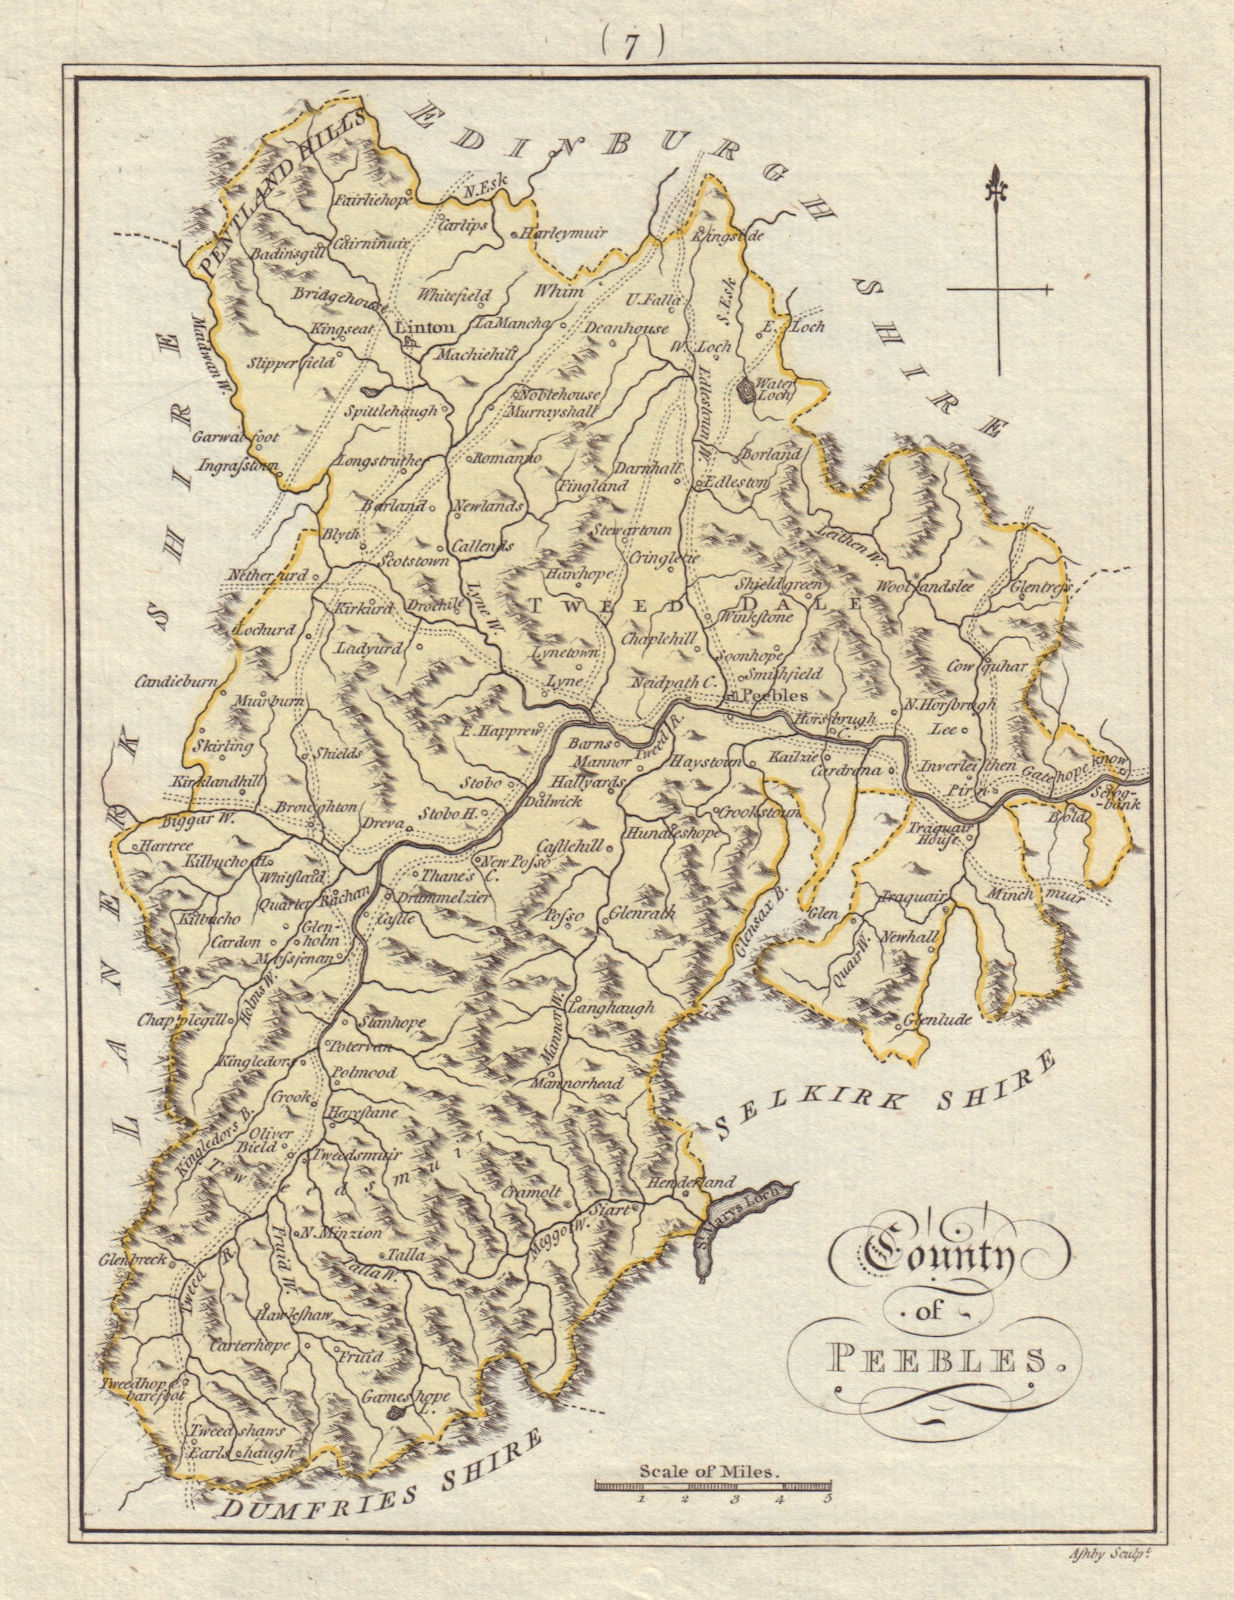 Associate Product County of Peebles. Peebleshire. SAYER / ARMSTRONG 1794 old antique map chart